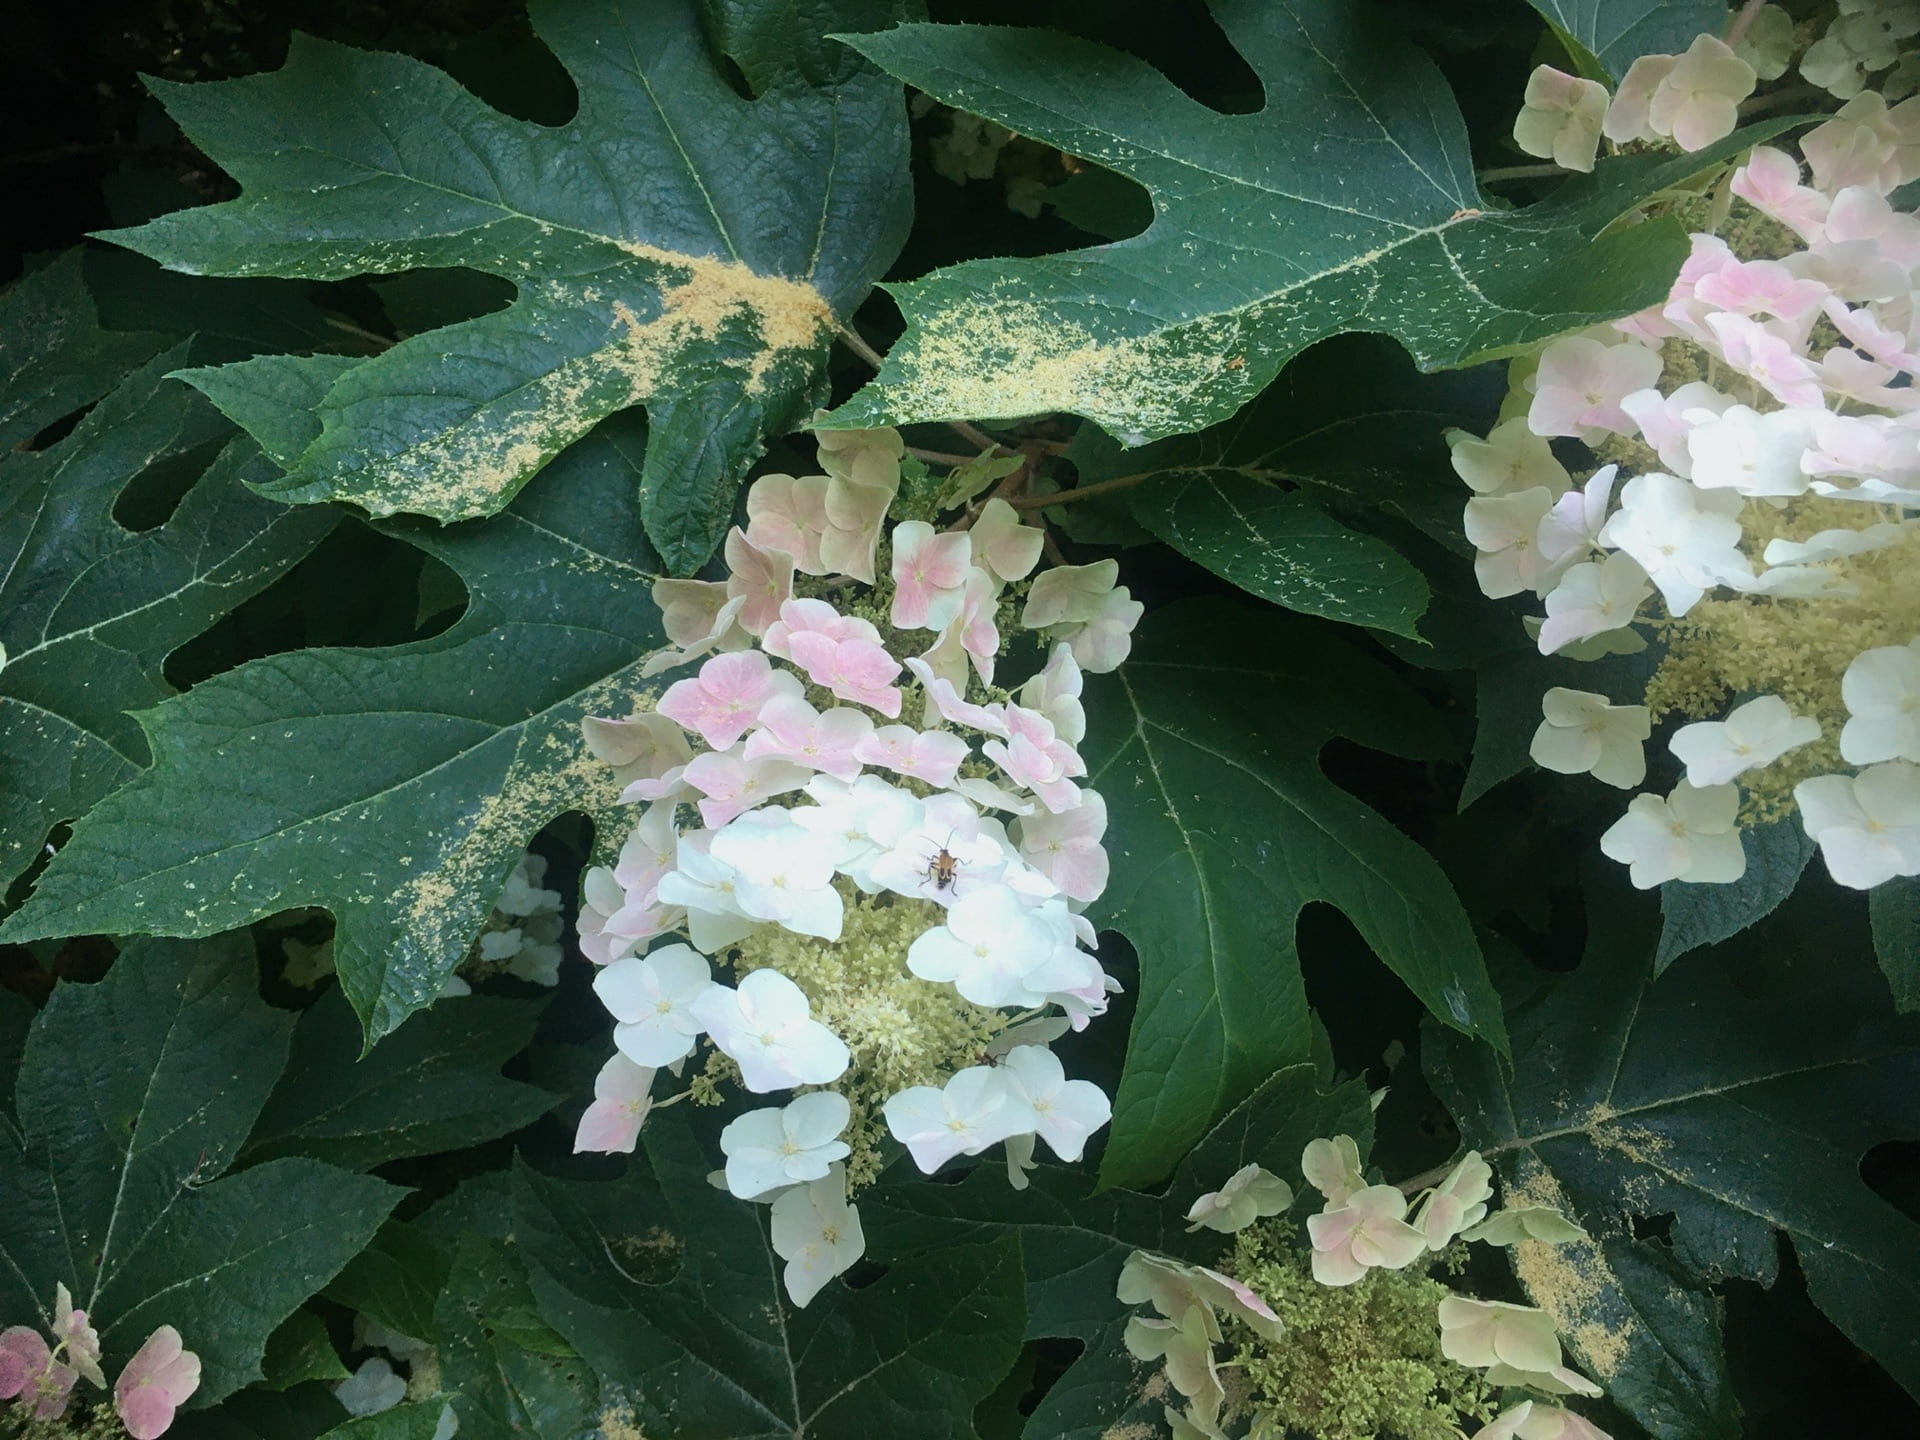 A display of Hydrangea quercifolia flowers in full bloom.